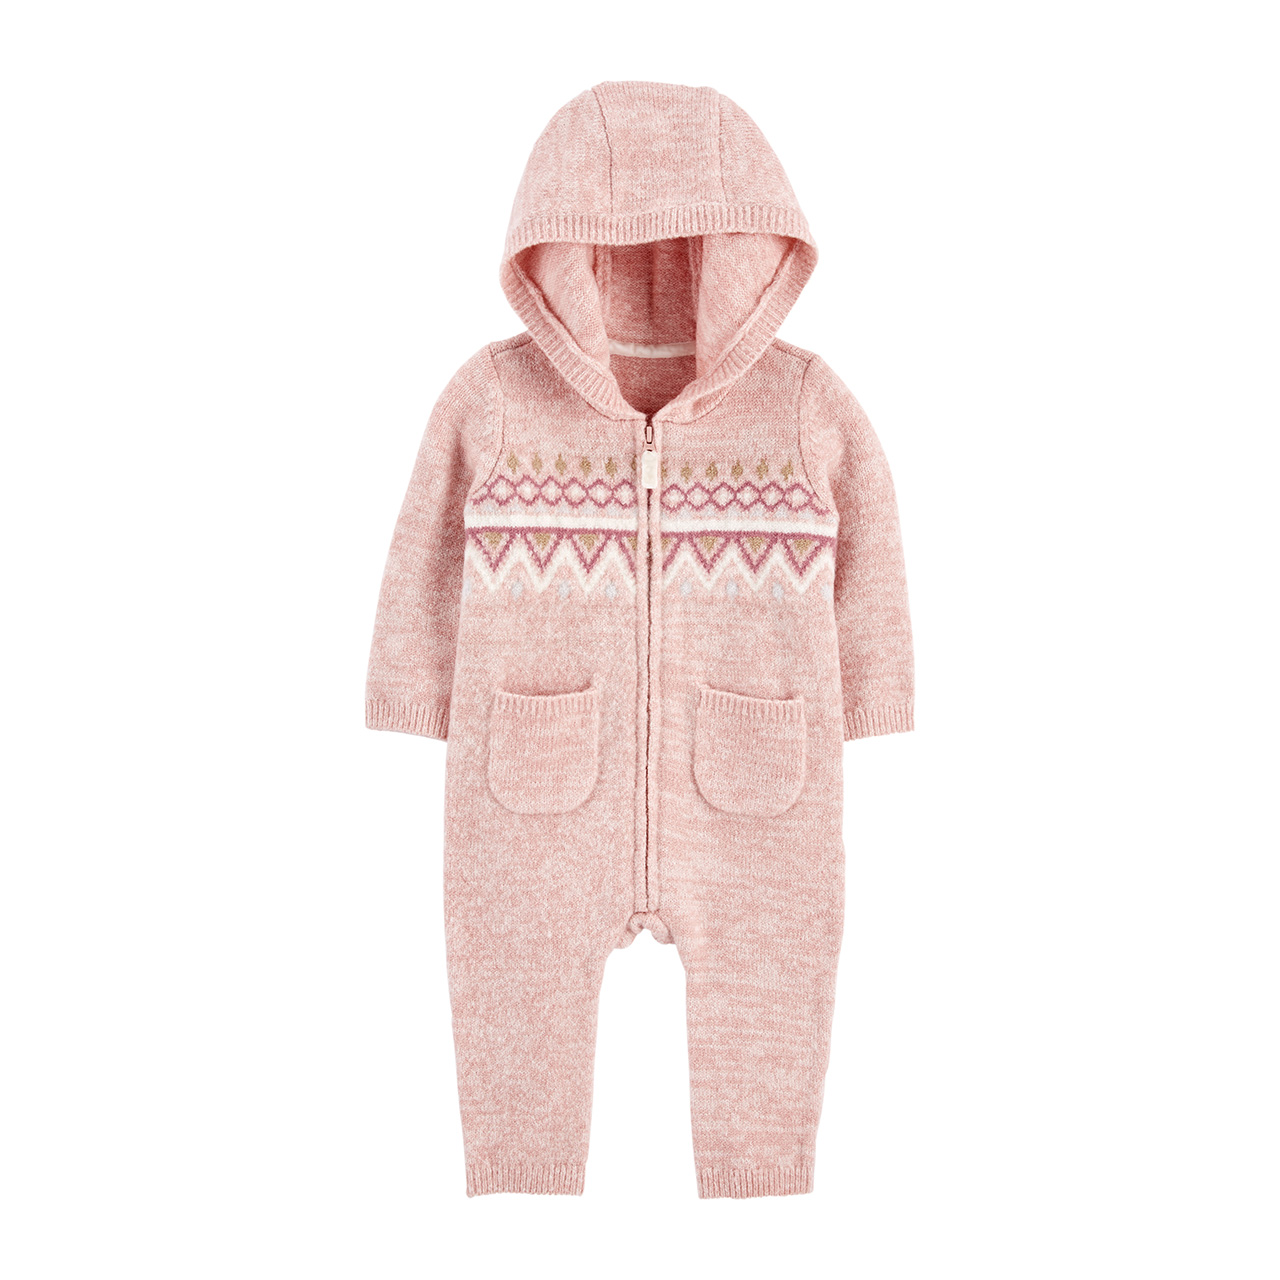 A soft pink full-body jumpsuit for babies.